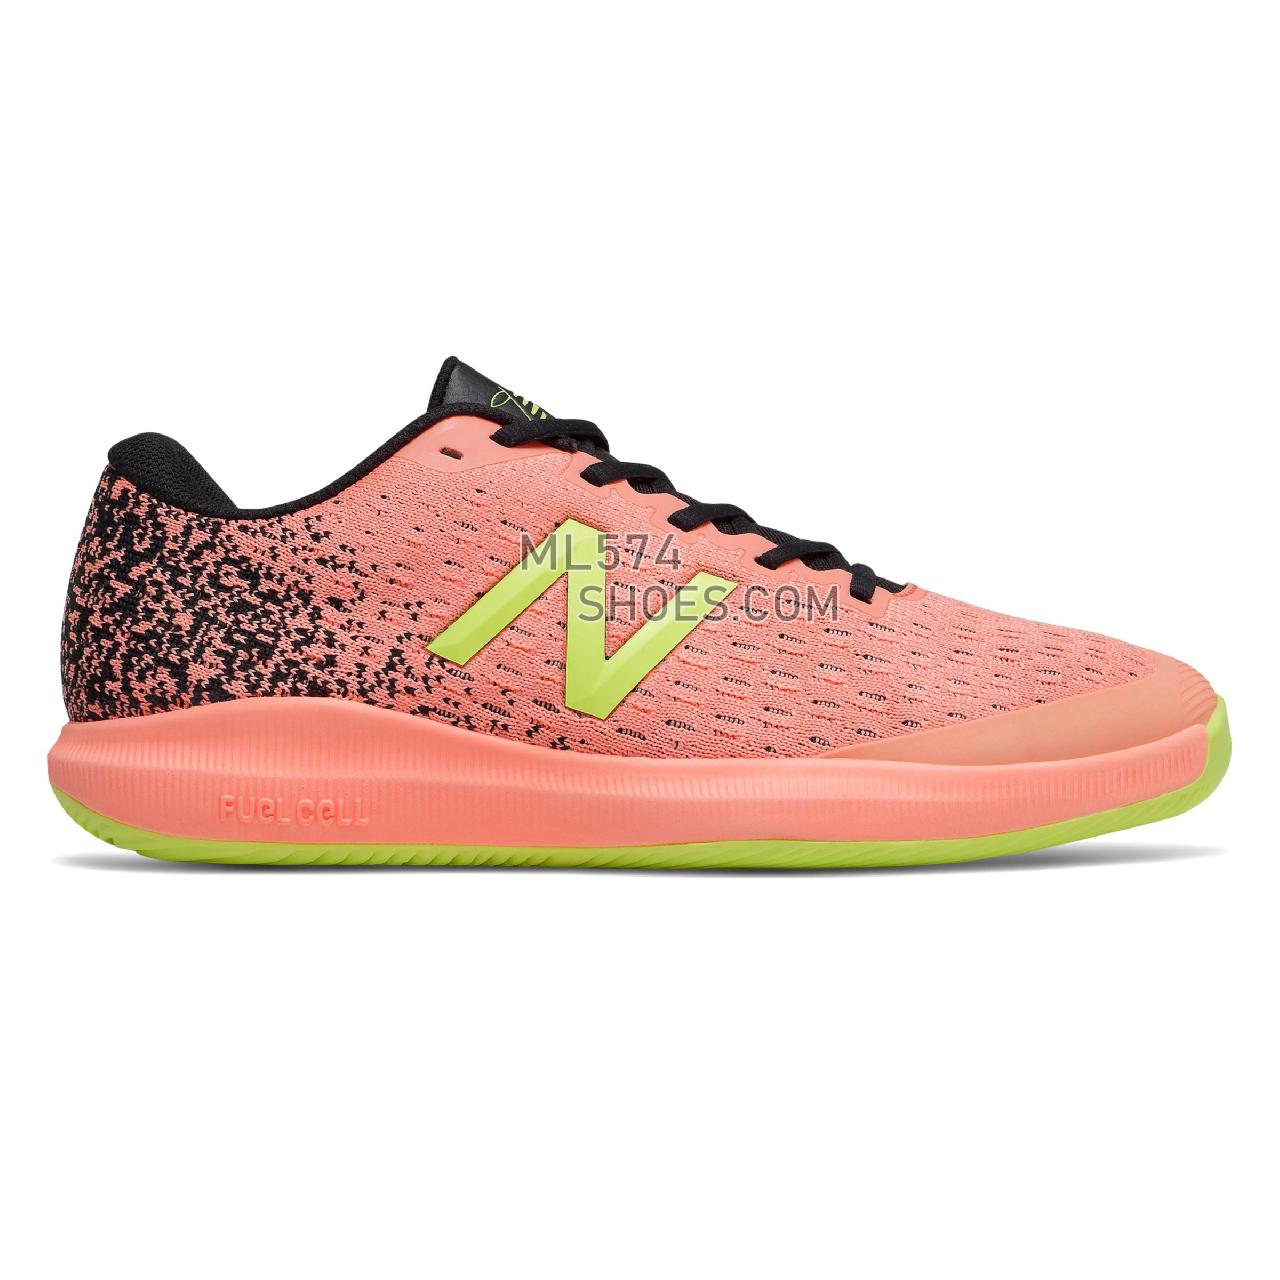 New Balance FuelCell 996v4 - Men's Tennis - Ginger Pink with Black and Hi Lite - MCH996M4